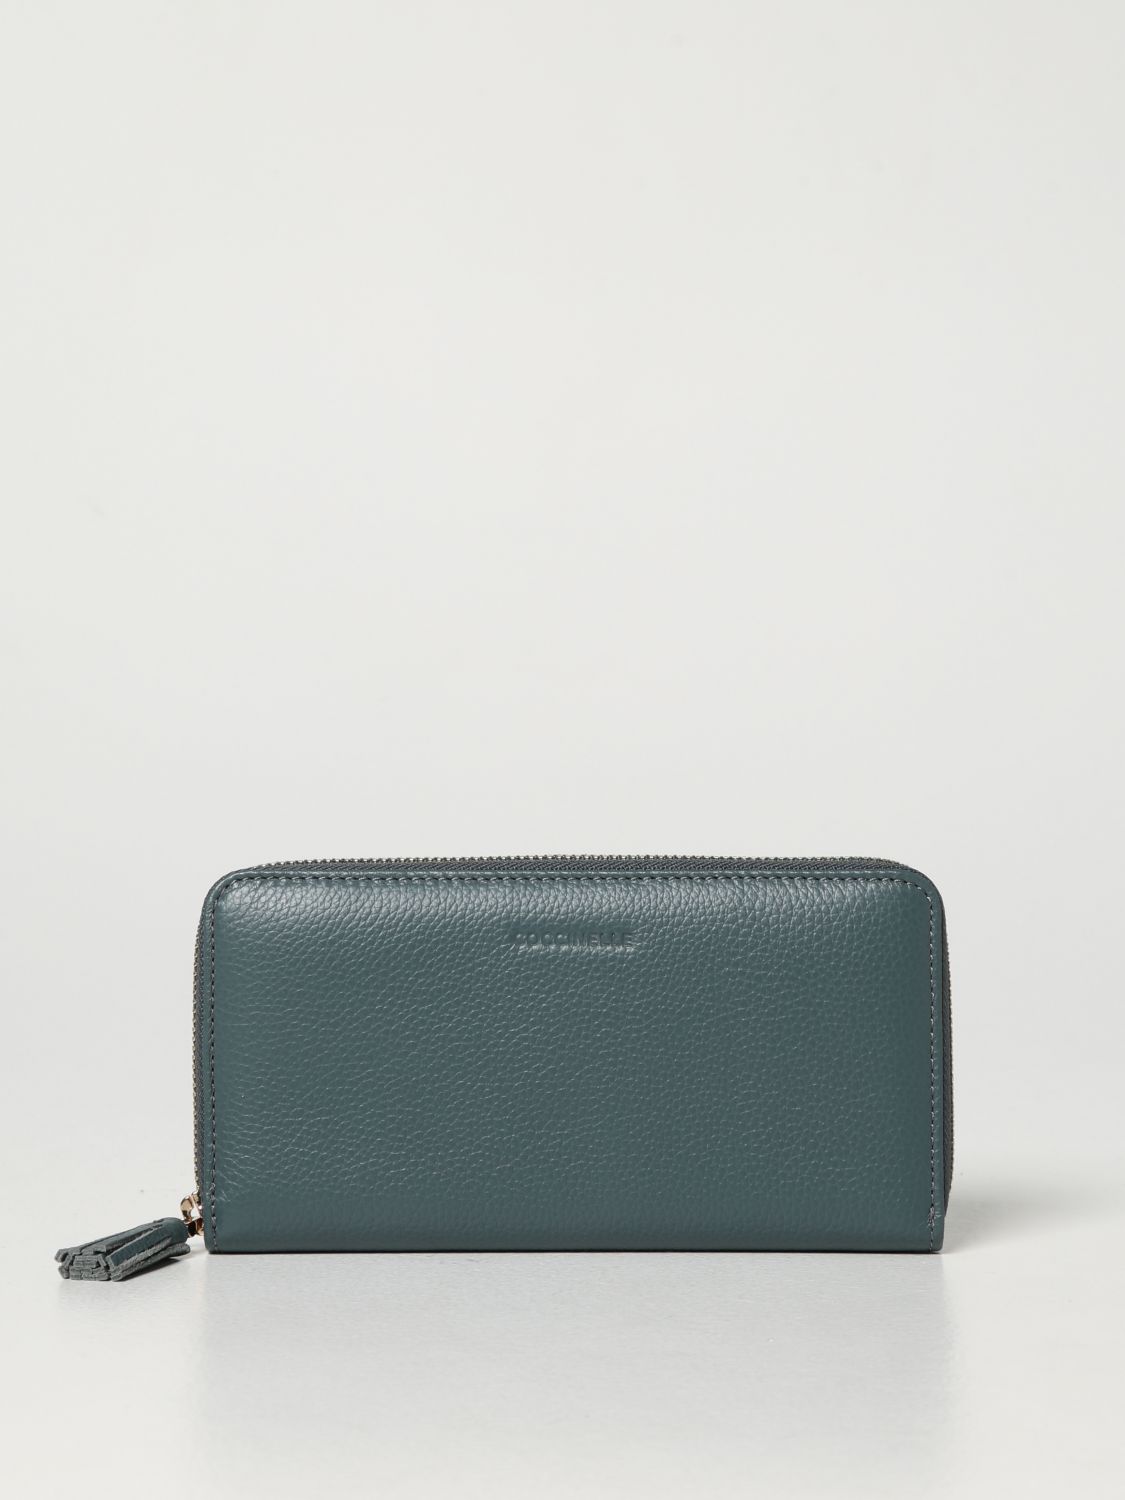 COCCINELLE: wallet in grained leather - Grey | Coccinelle wallets ...